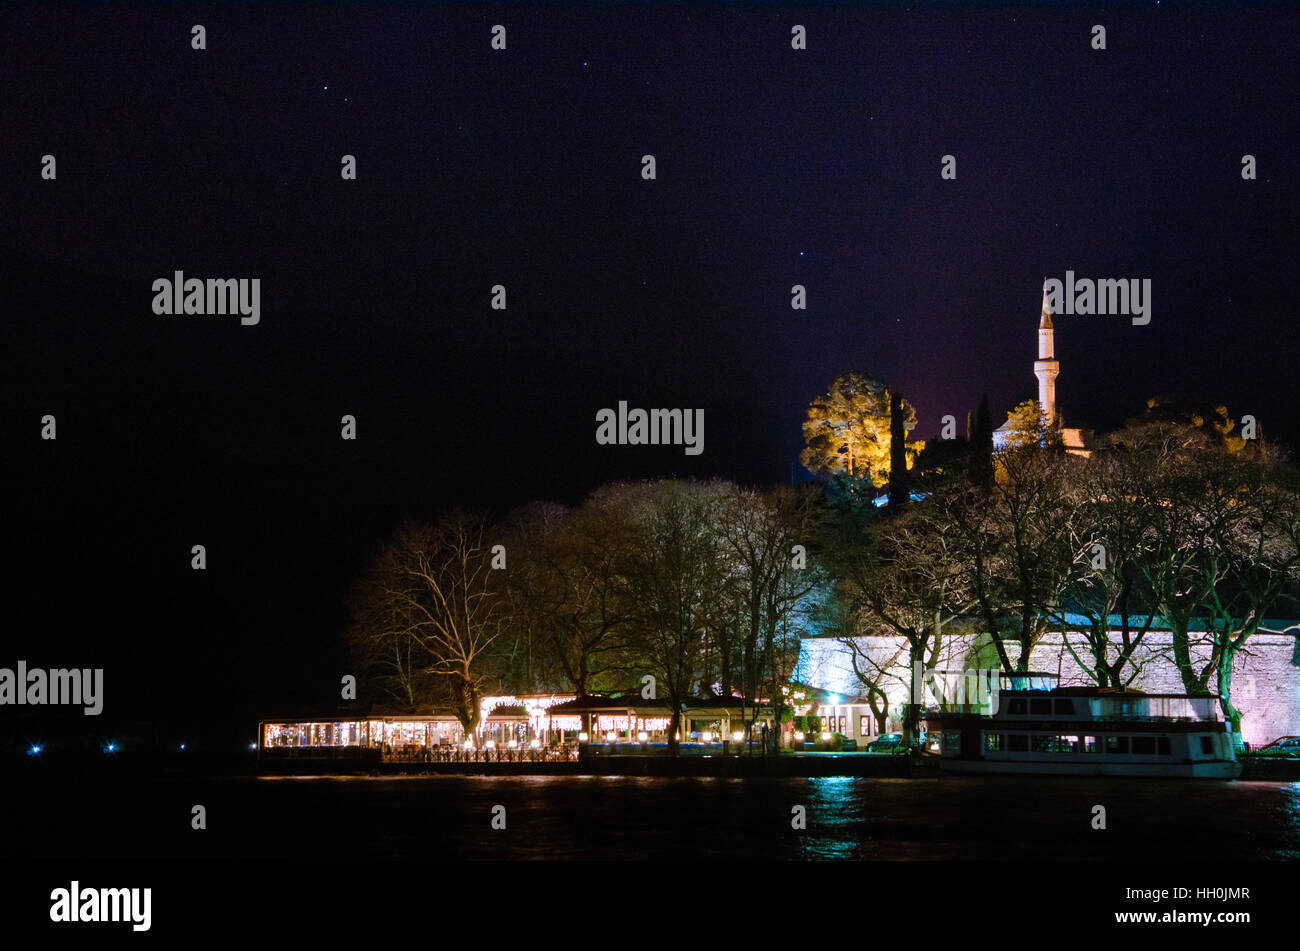 Ioannina city in Greece. View of the lake and the mosque of Aslan Pasa cami at night. Stock Photo